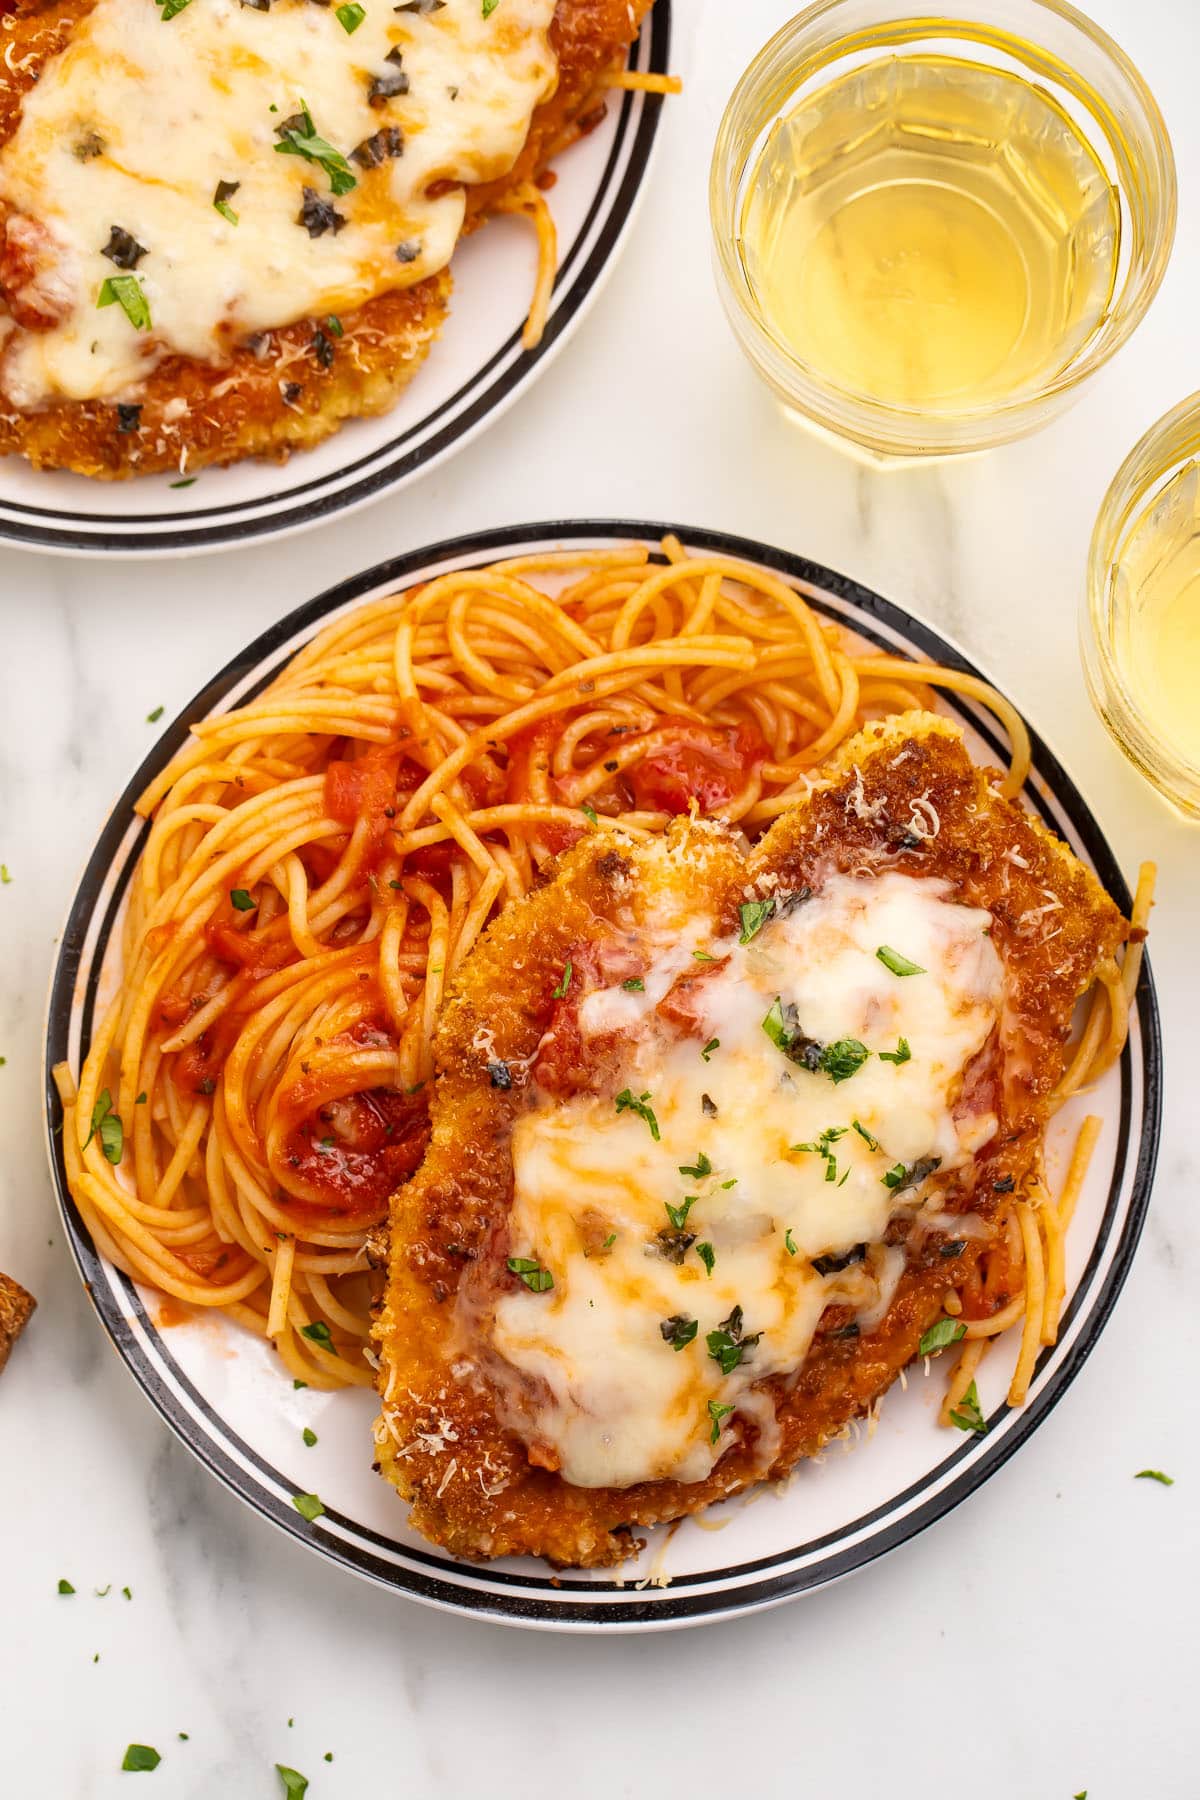 Gluten free chicken parmesan on a large plate with gluten free spaghetti and tomato sauce.